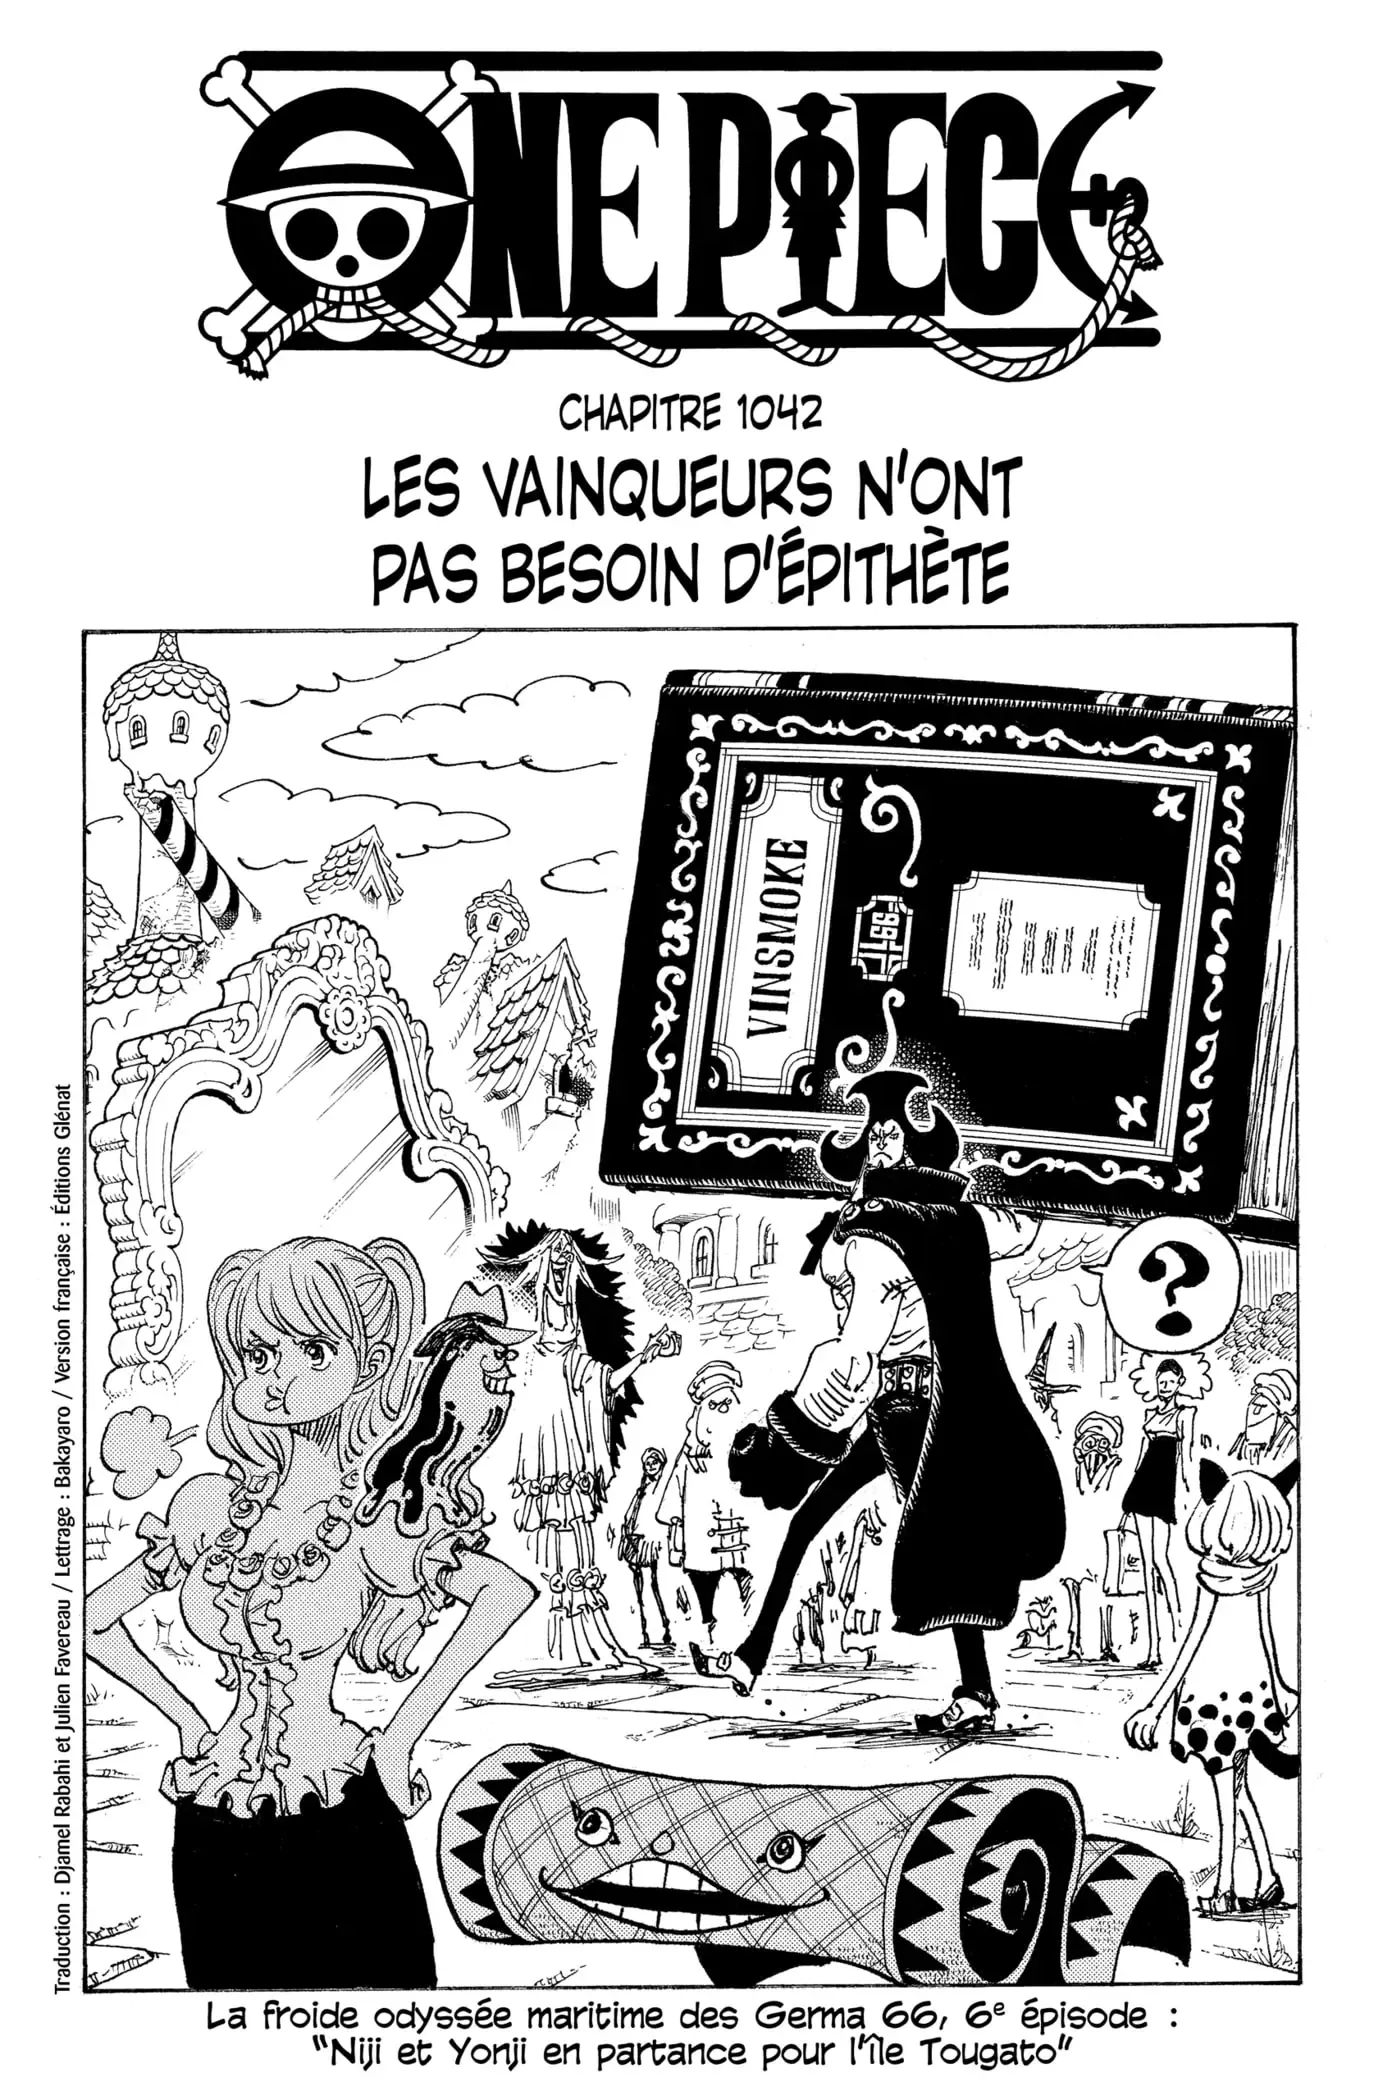 One Piece: Chapter chapitre-1042 - Page 1